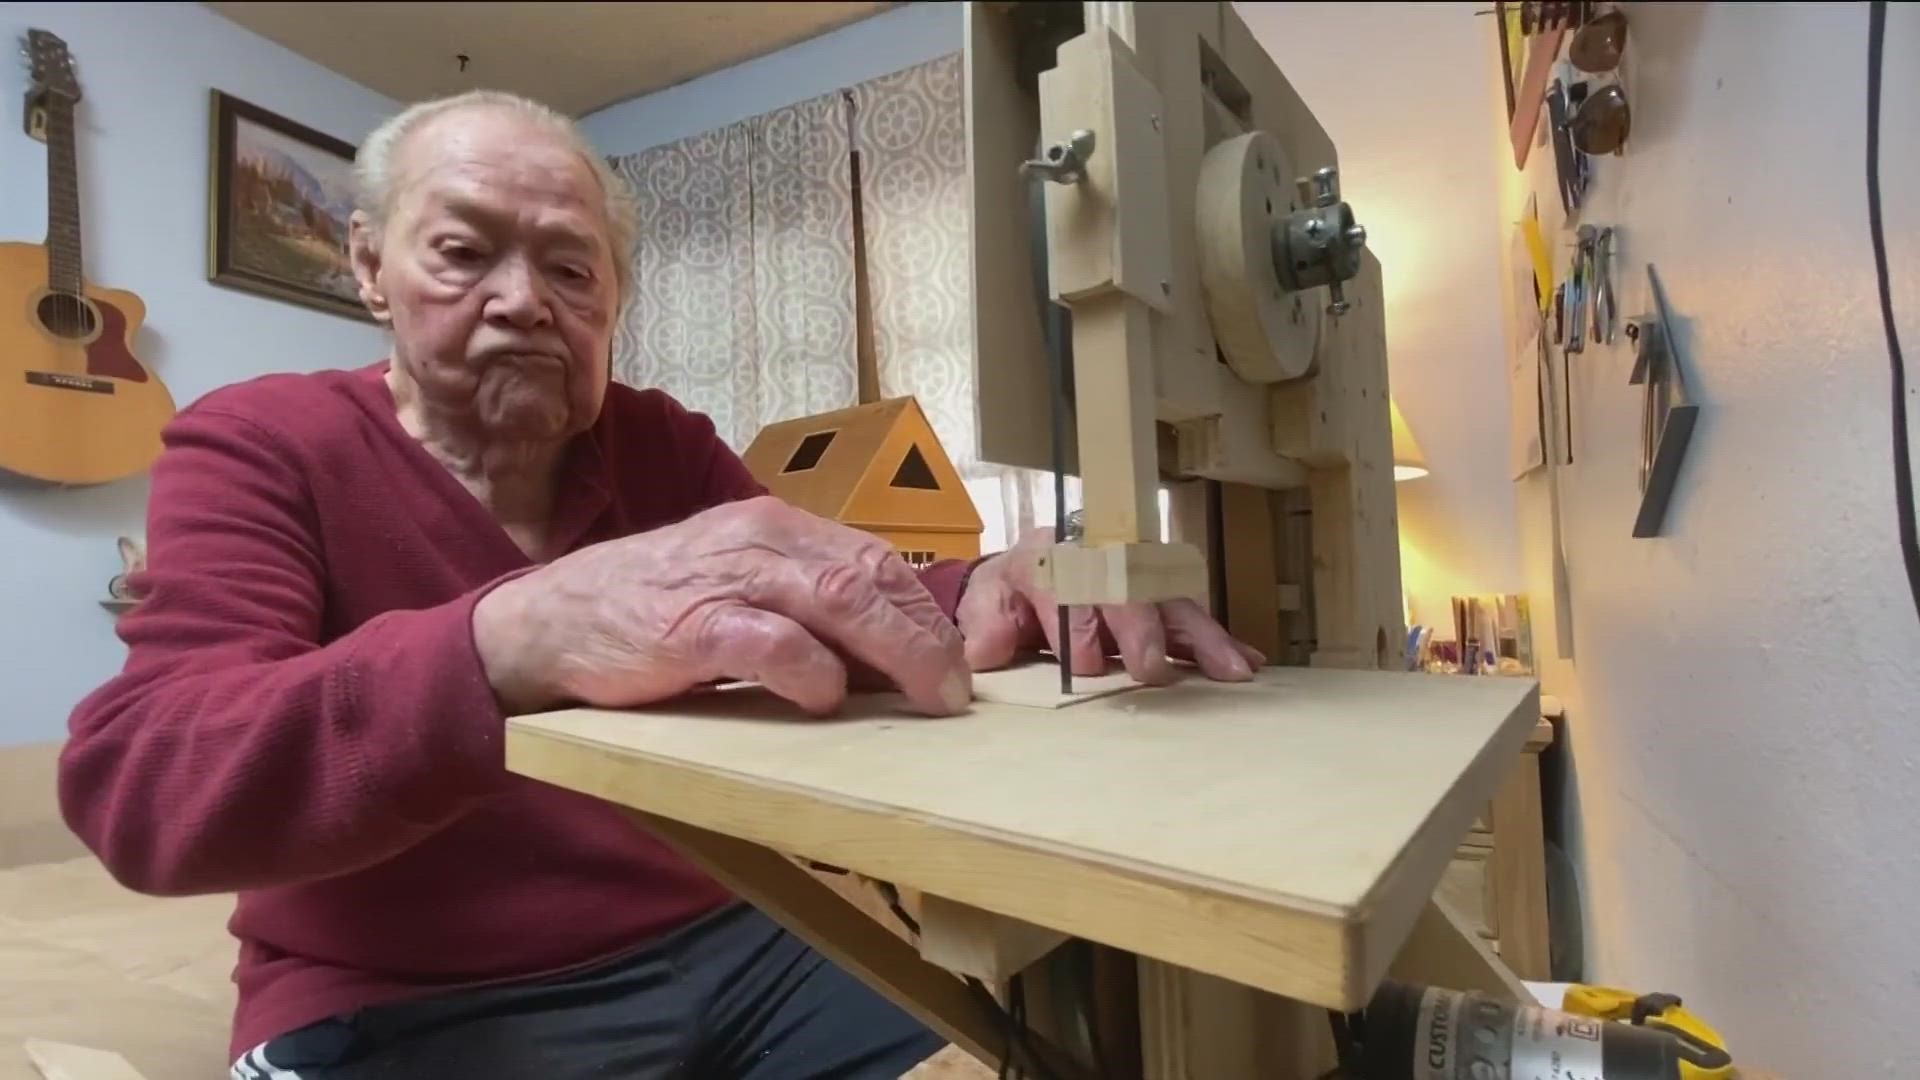 James Bass created his own wood crafting playground in his 9 x 10 assisted living room.